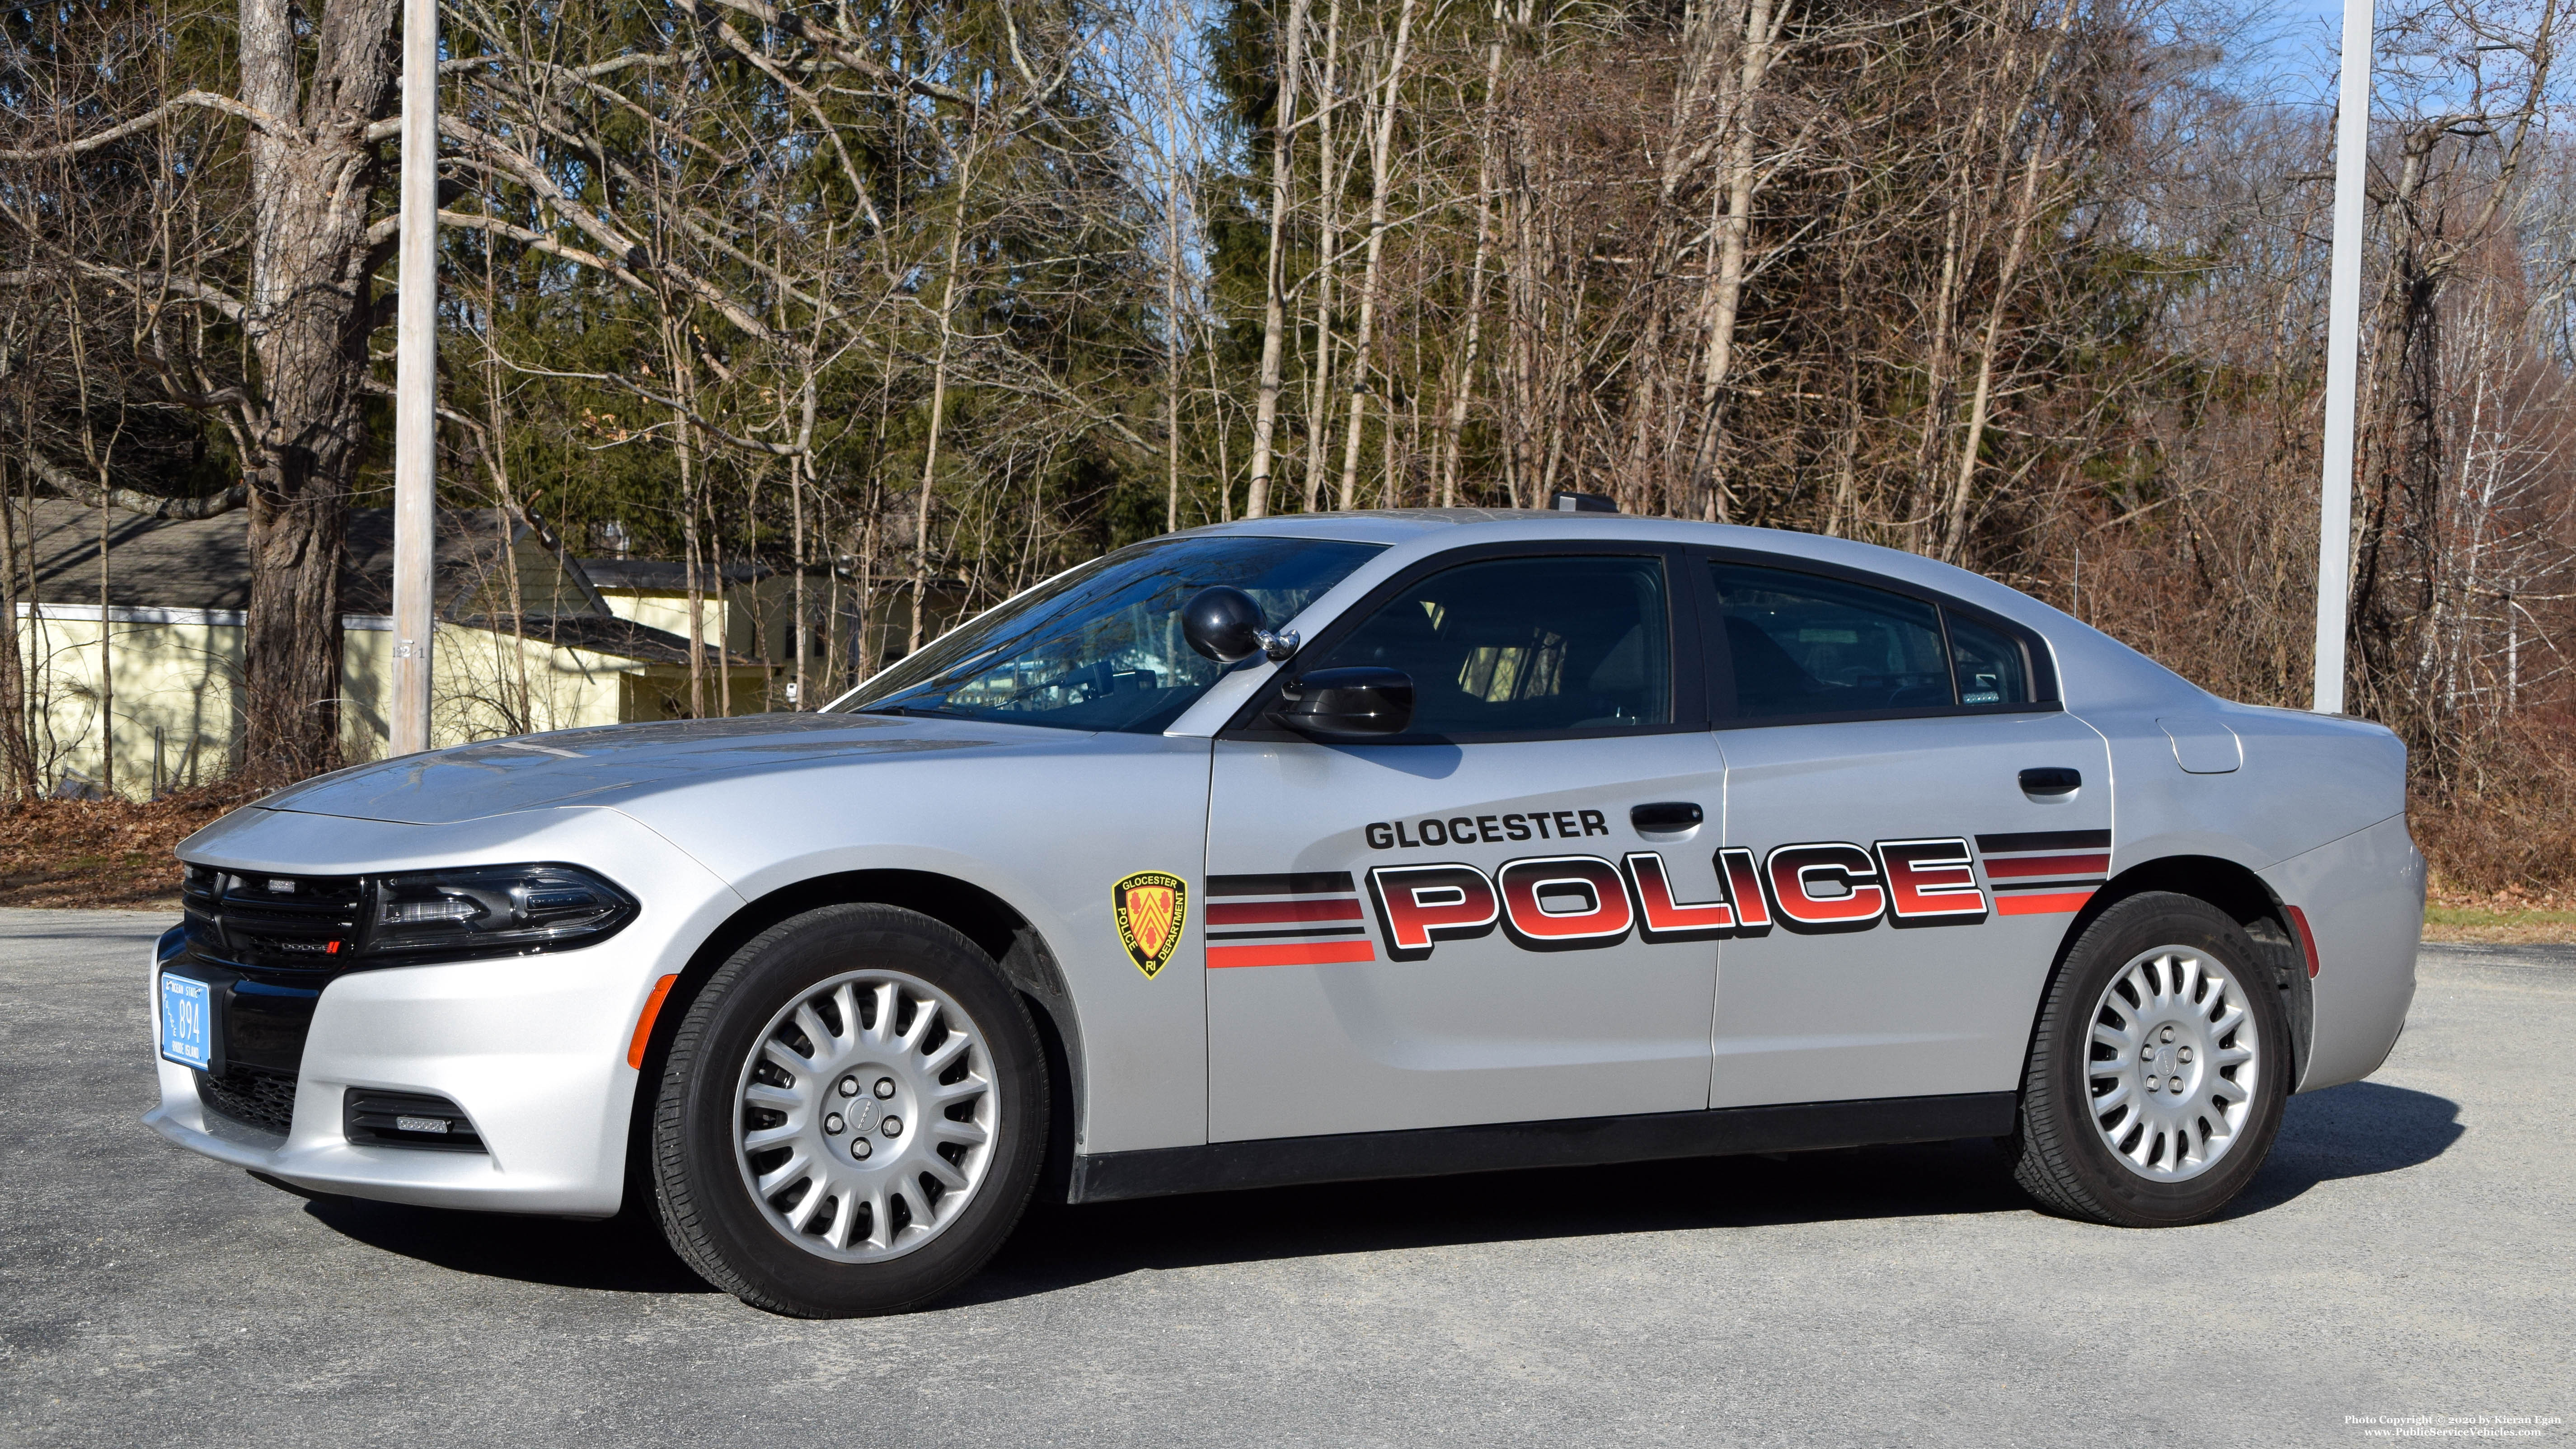 A photo  of Glocester Police
            Cruiser 894, a 2019 Dodge Charger             taken by Kieran Egan